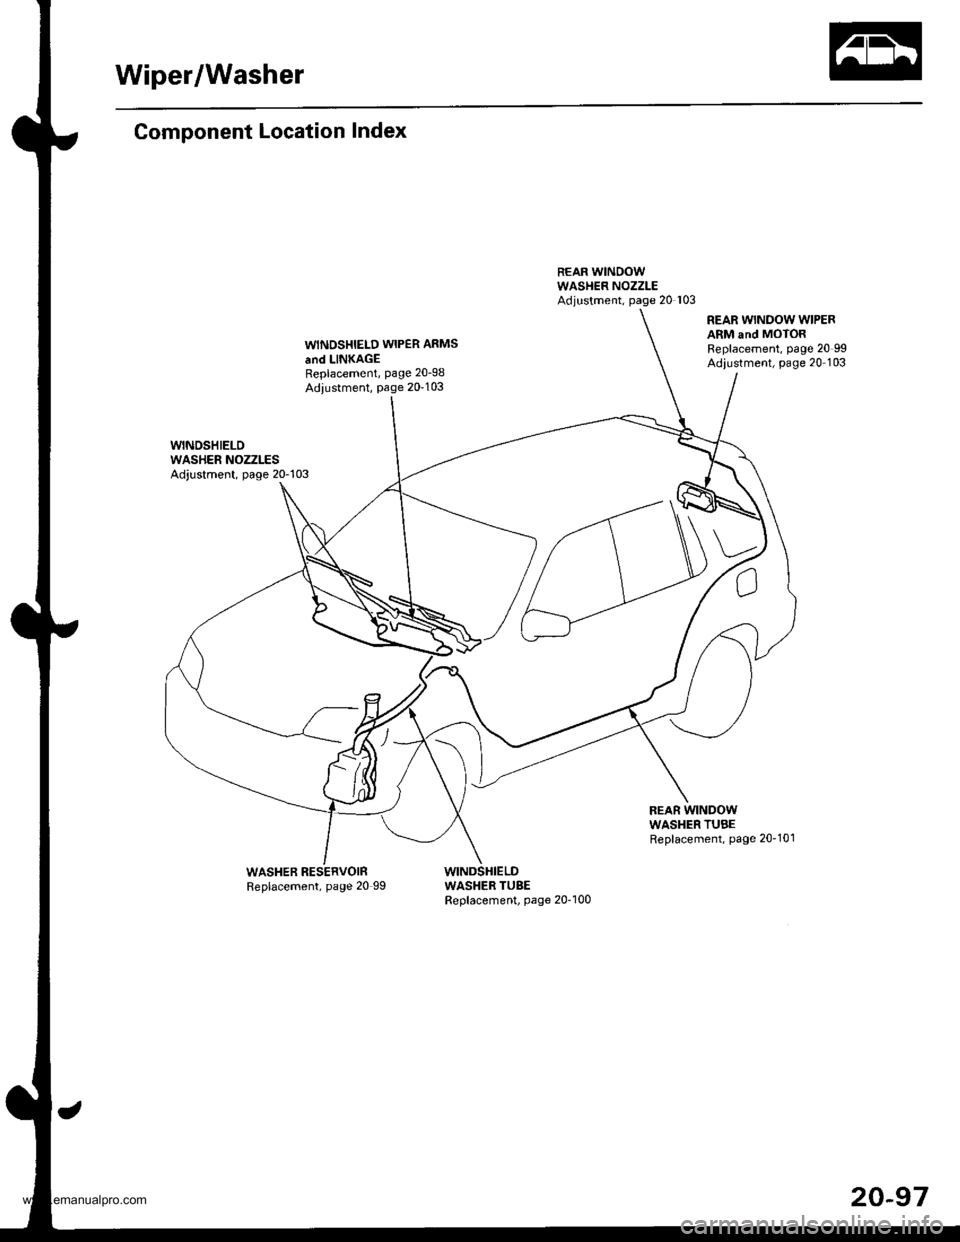 HONDA CR-V 1998 RD1-RD3 / 1.G Workshop Manual 
Wiper/Washer
Component Location Index
WINOSHIELD WIPER ARMS
and LINKAGEReplacement, page 20-98
Adiustment, Page 20-103
REAR WINDOW WIPERARM and MOTORReplacement, page 20 99Adiustment, page 20 103
WAS